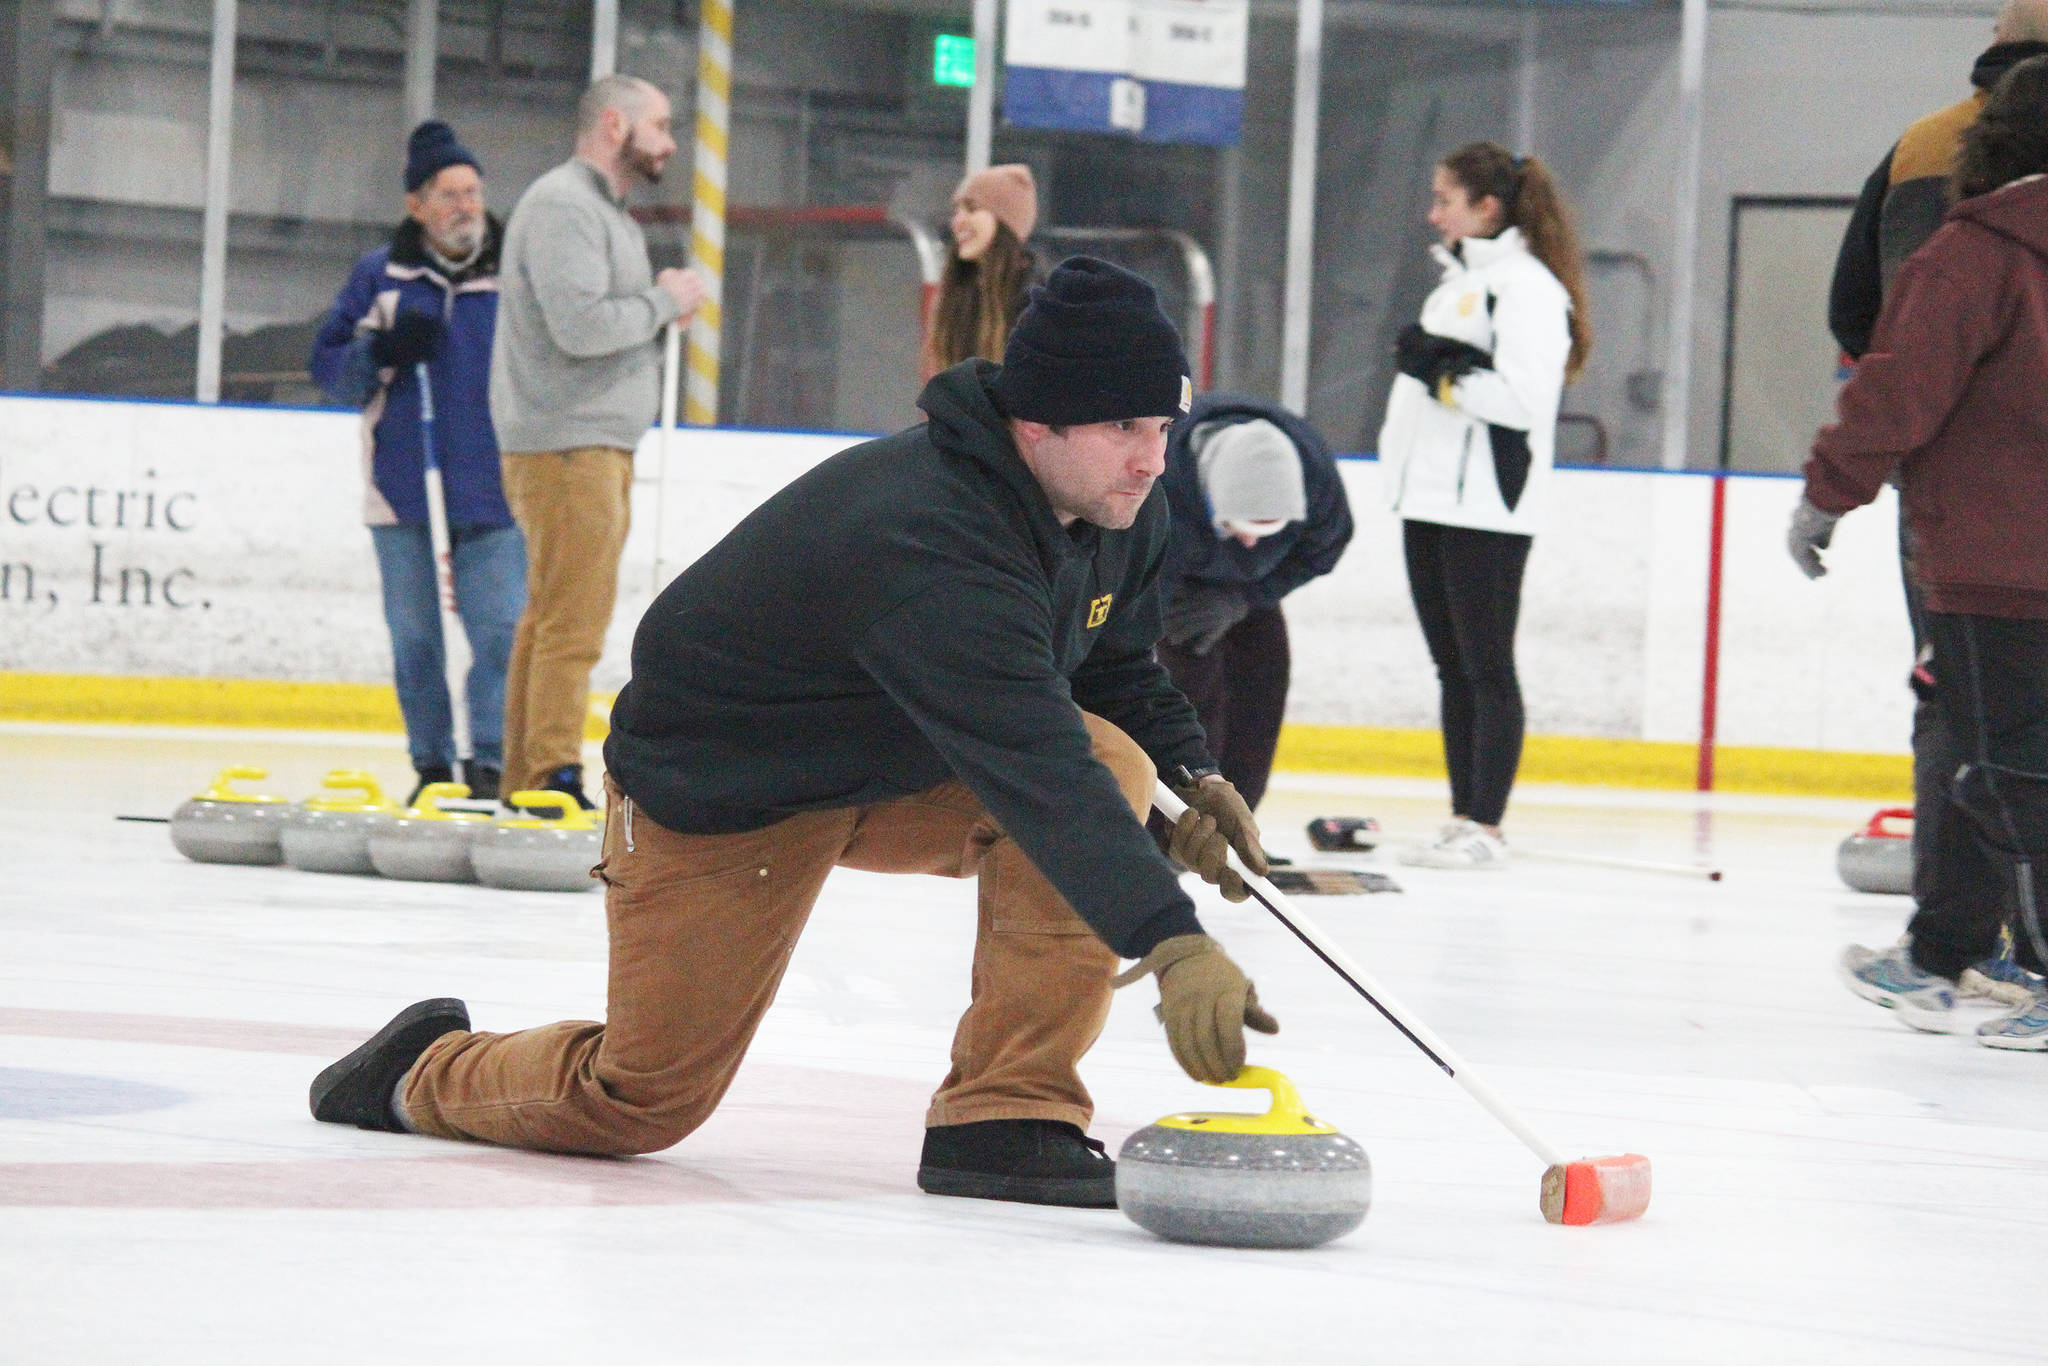 Chuck Bowman slides a curling stone during a Learn to Curl clinic Saturday, Jan. 12, 2019 at the Kevin Bell Ice Arena in Homer, Alaska. The clinic, a fundraiser for the Homer Curling Club, was taught by former Olympic curler Jessica Schultz. (Photo by Megan Pacer/Homer News)